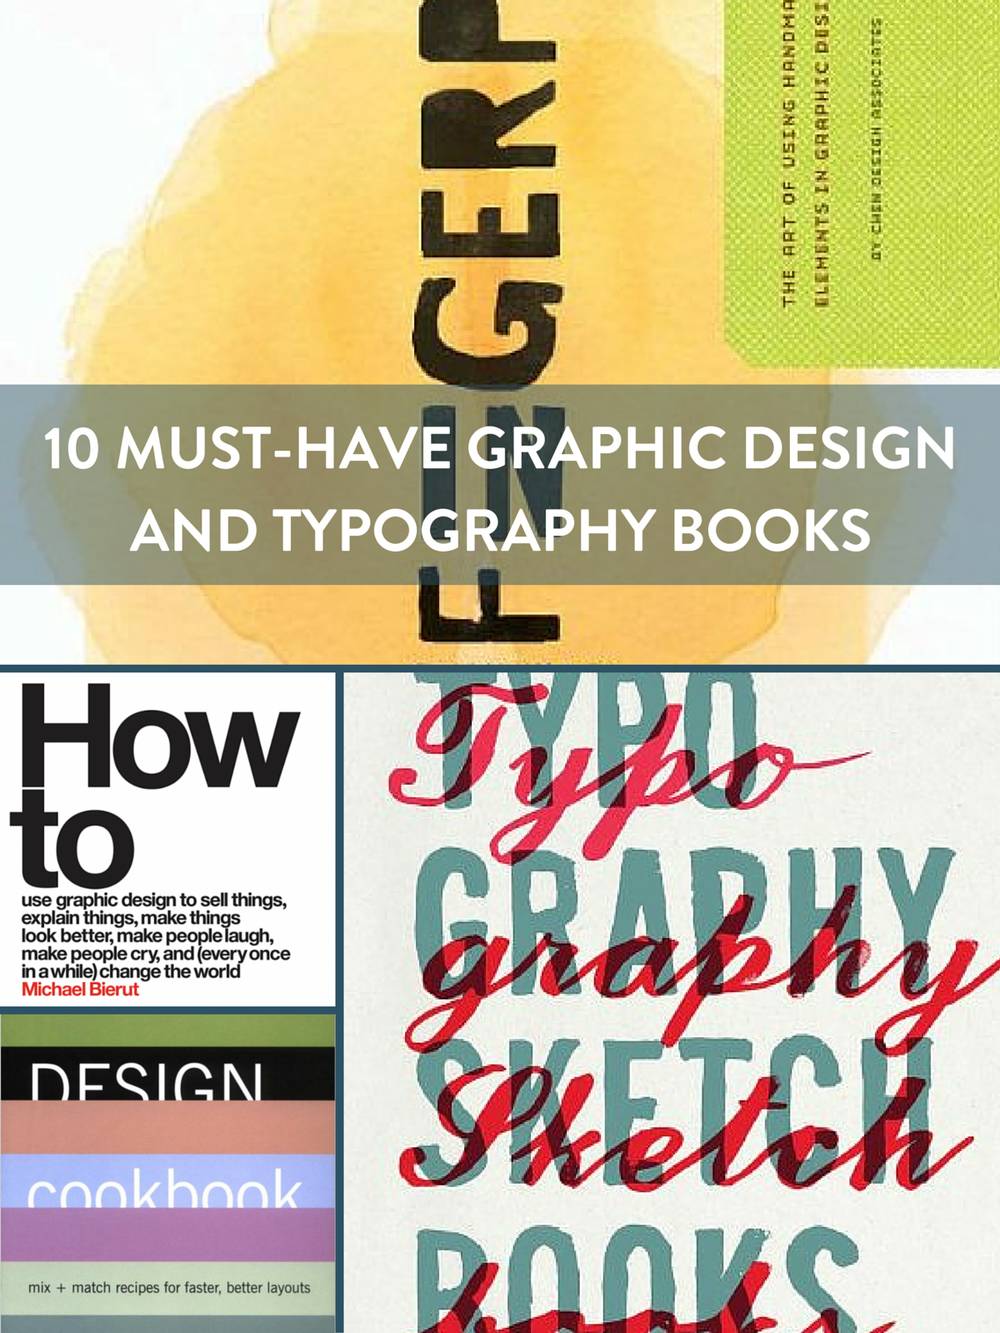 Graphic Design and Typography Books